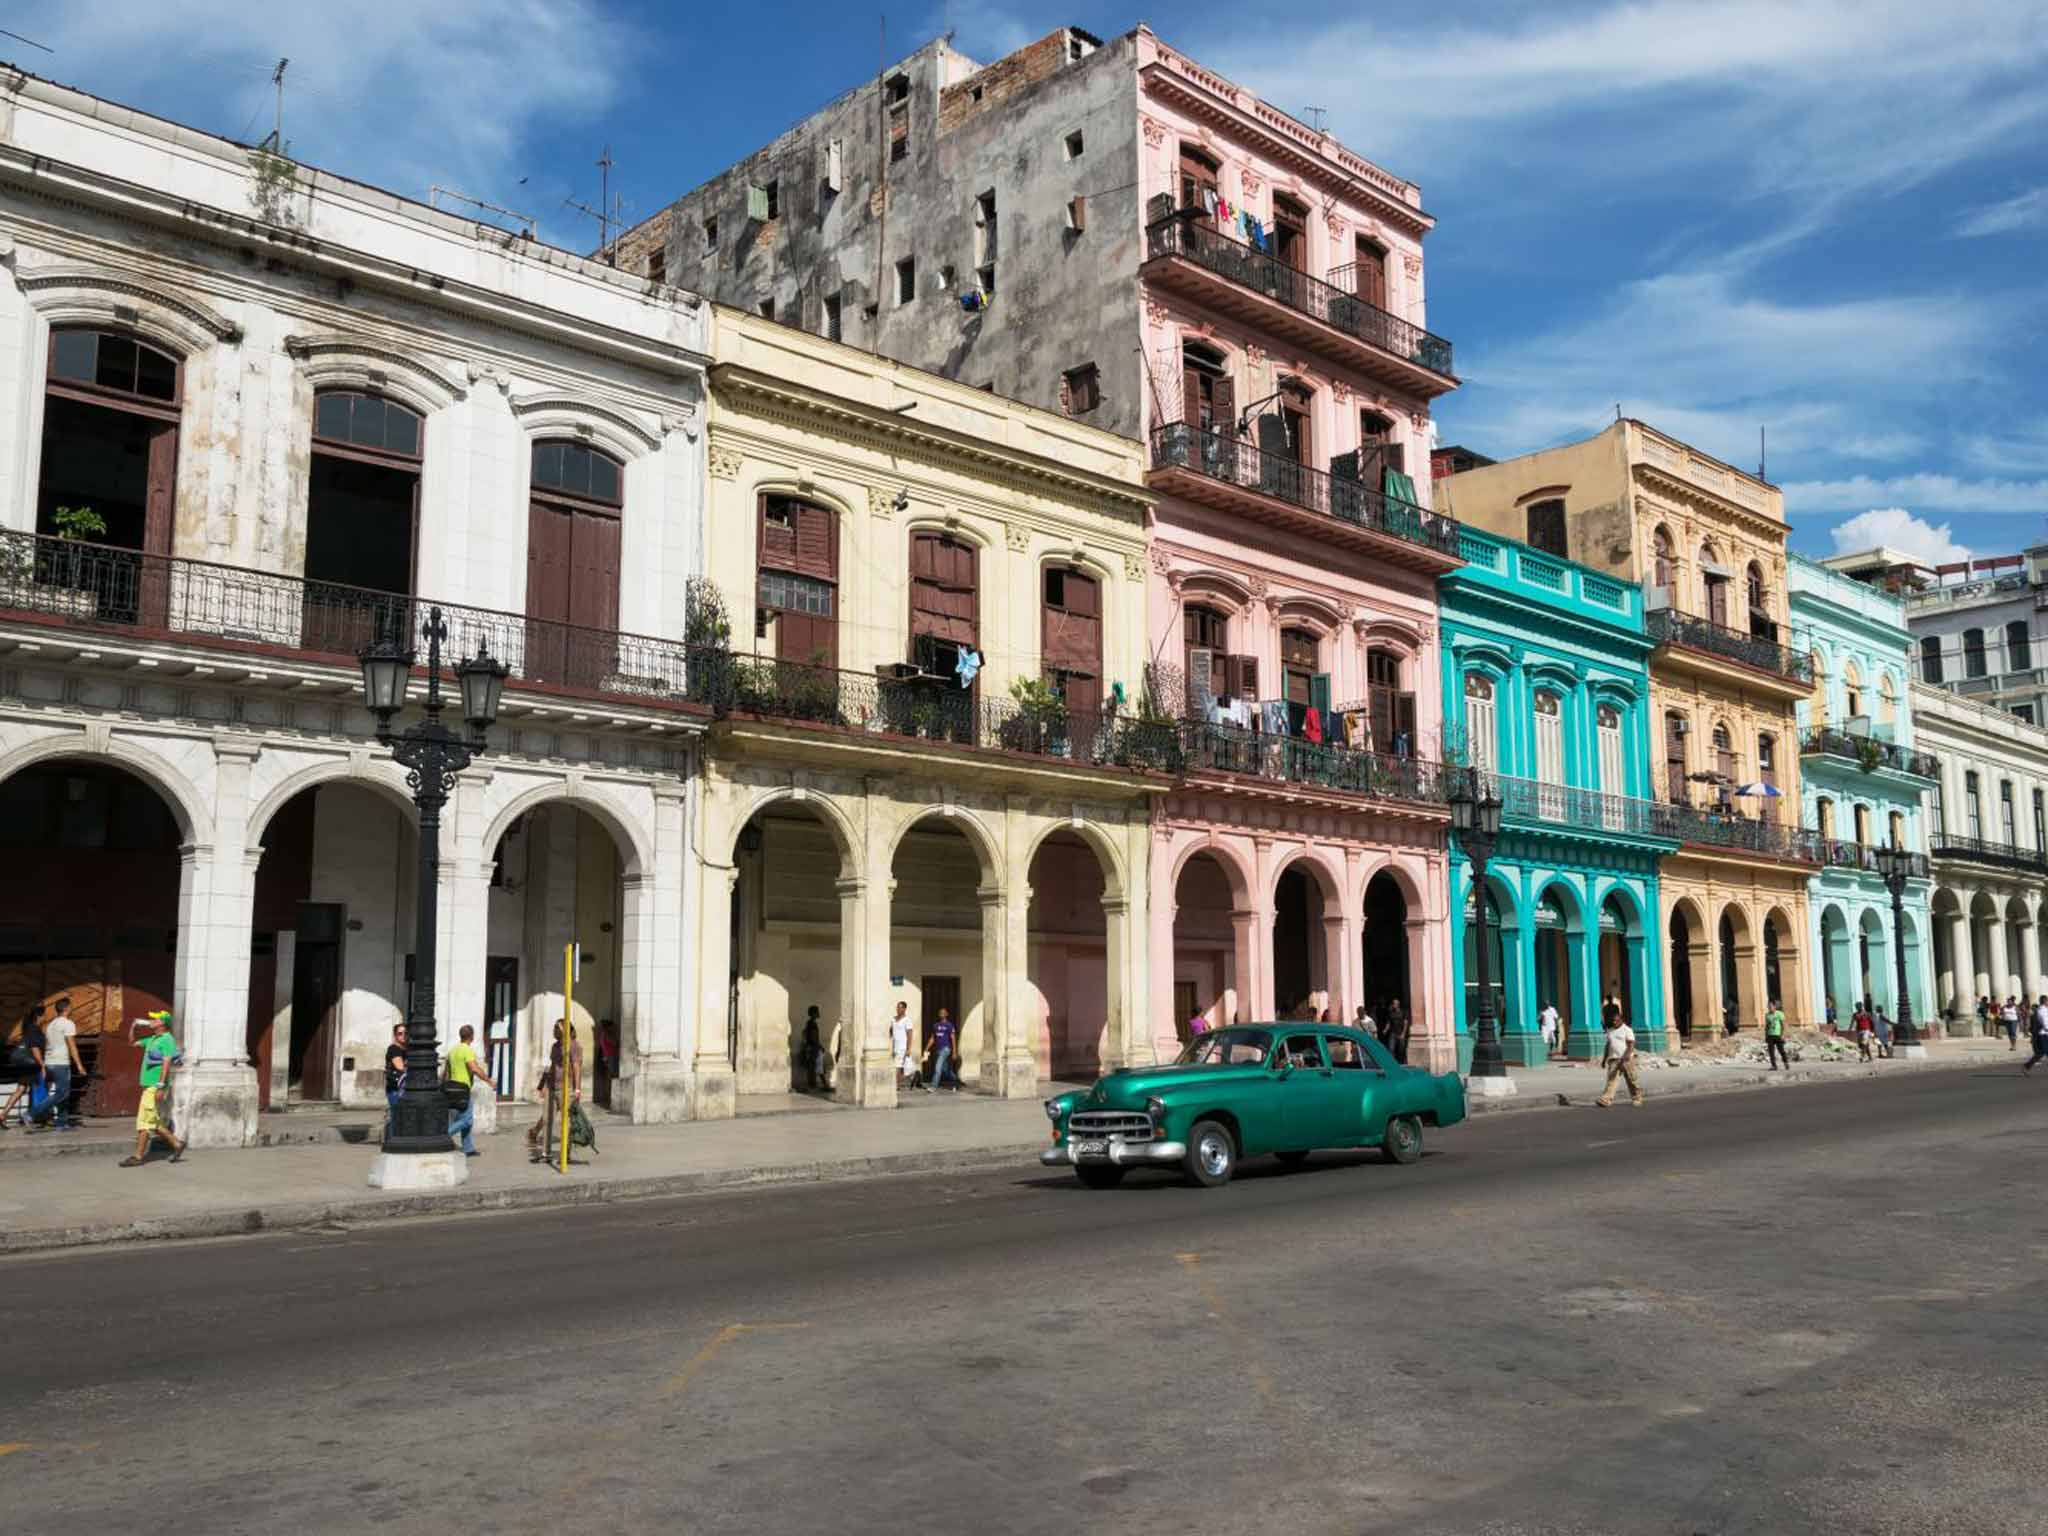 Revolutionary road: the Churches missed out on a trip to Cuba